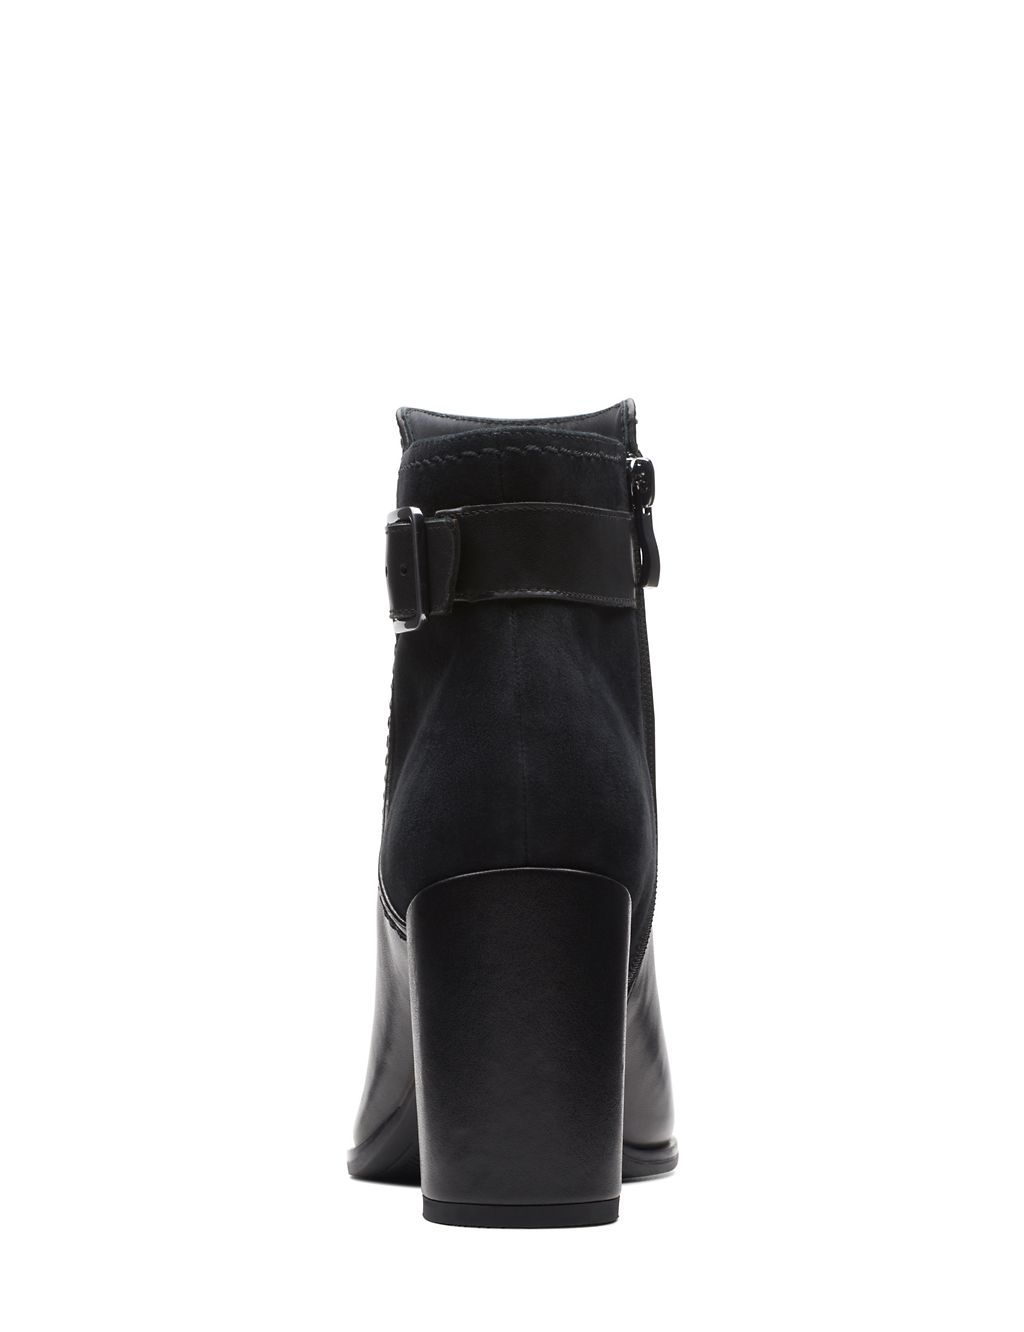 Leather Buckle Block Heel Ankle Boots 5 of 7